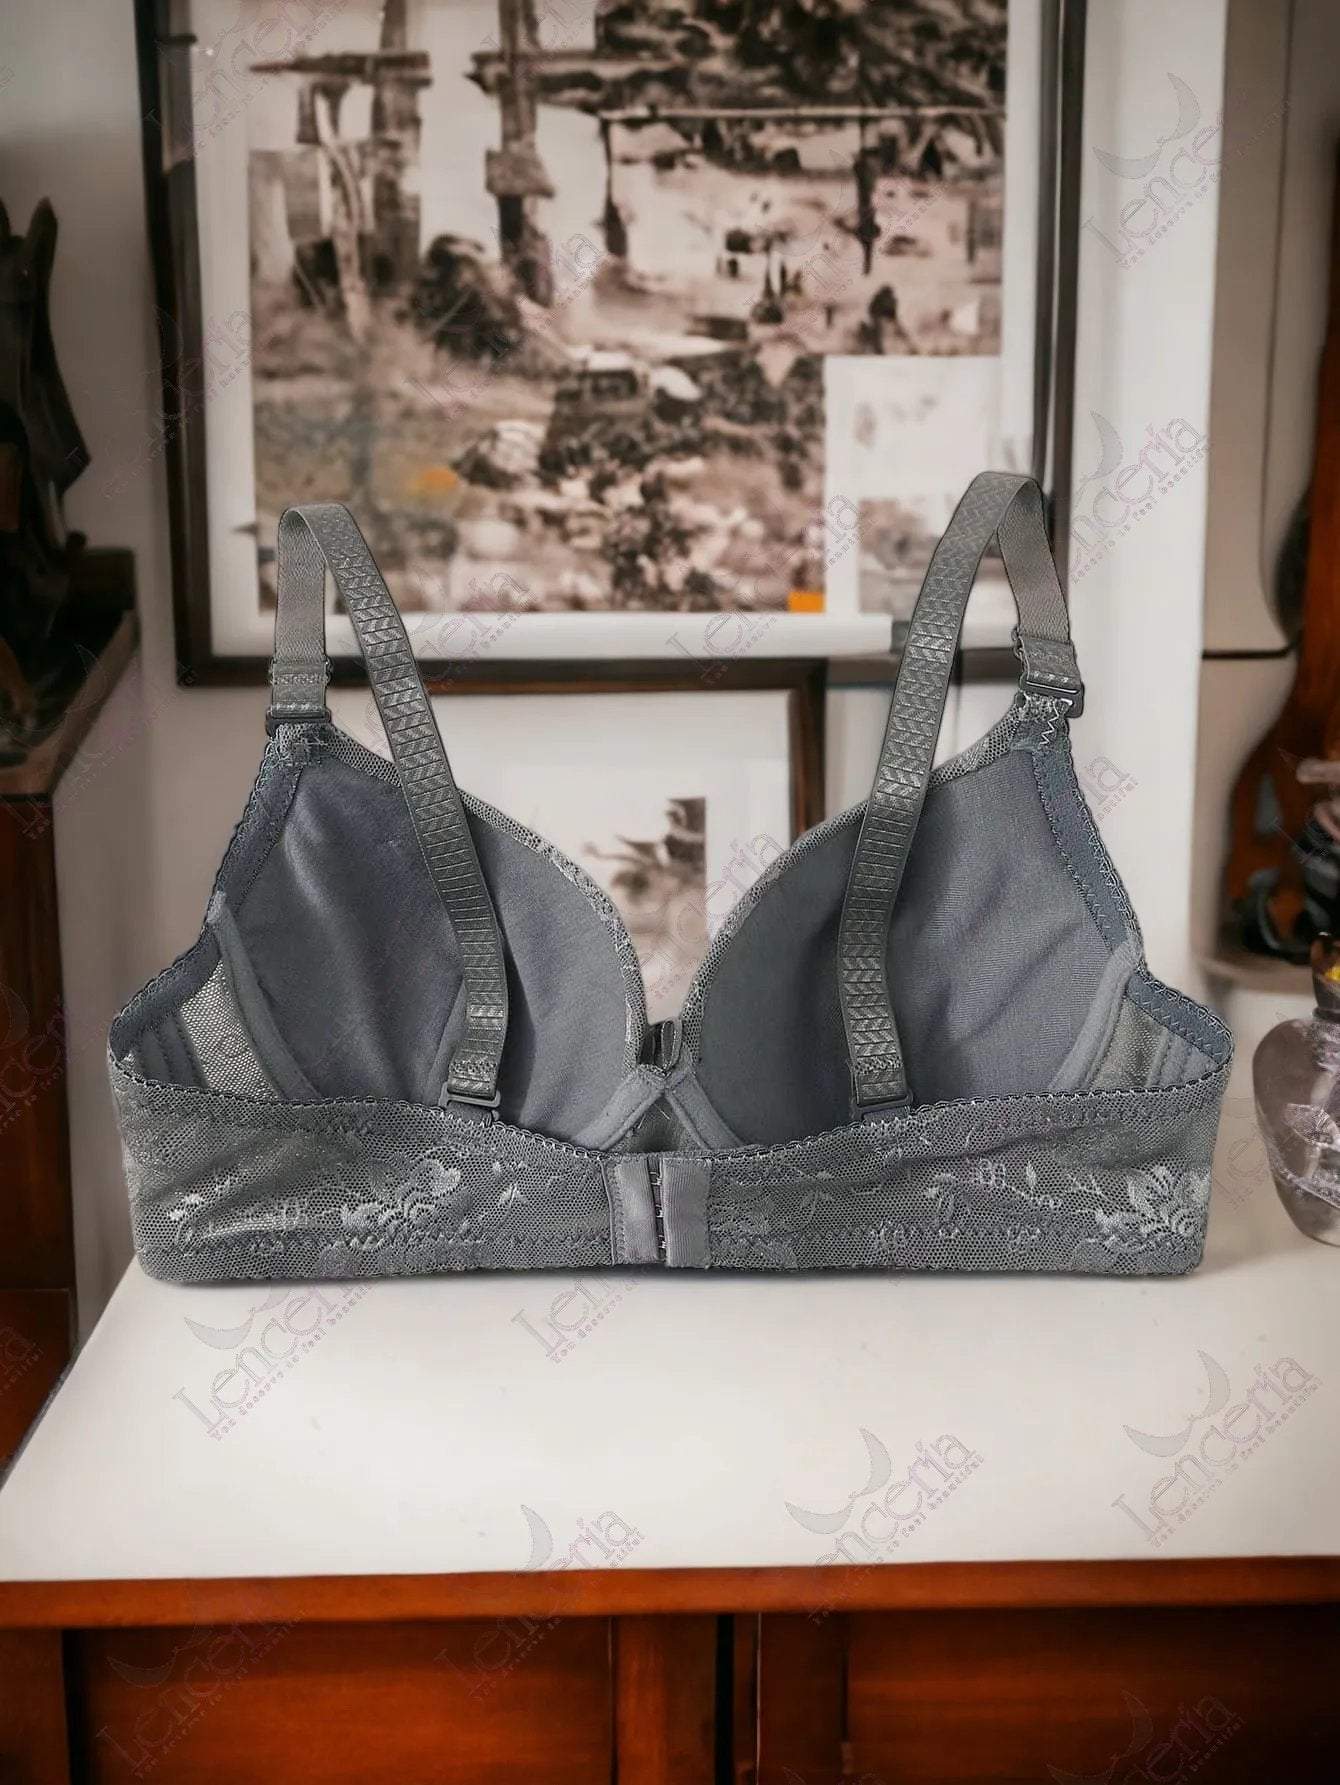 Cheriee Grey Argenti padded bra - extremely beautiful (c52)